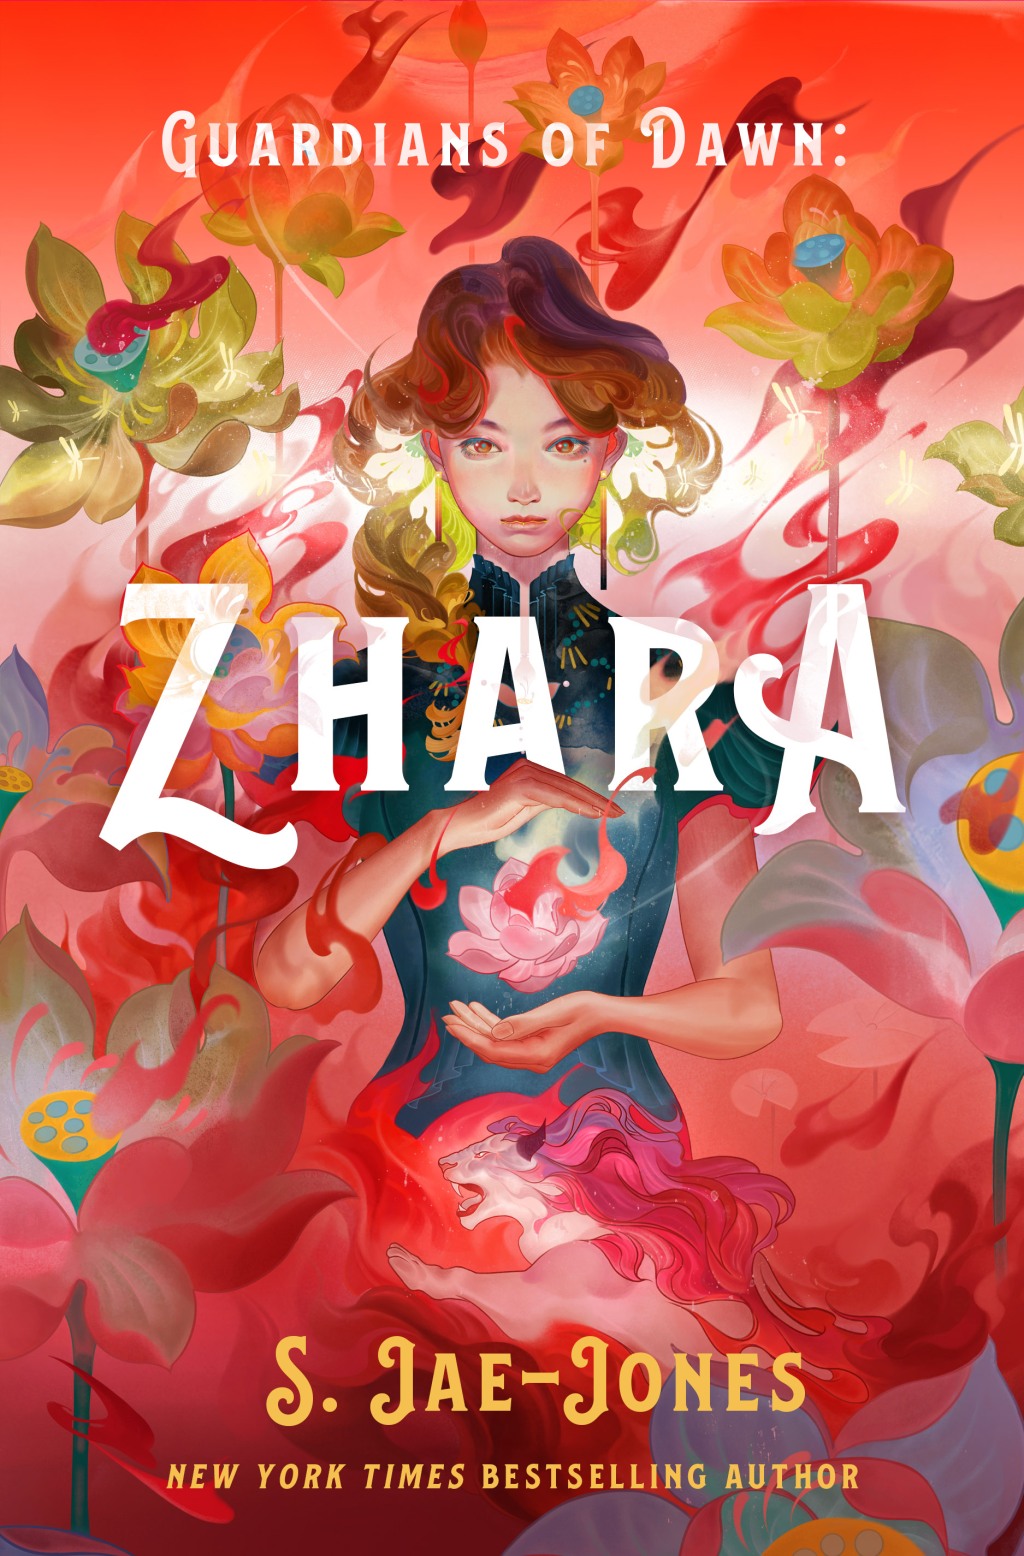 The New Sailor Guardians, Guardians of Dawn: Zhara in Review